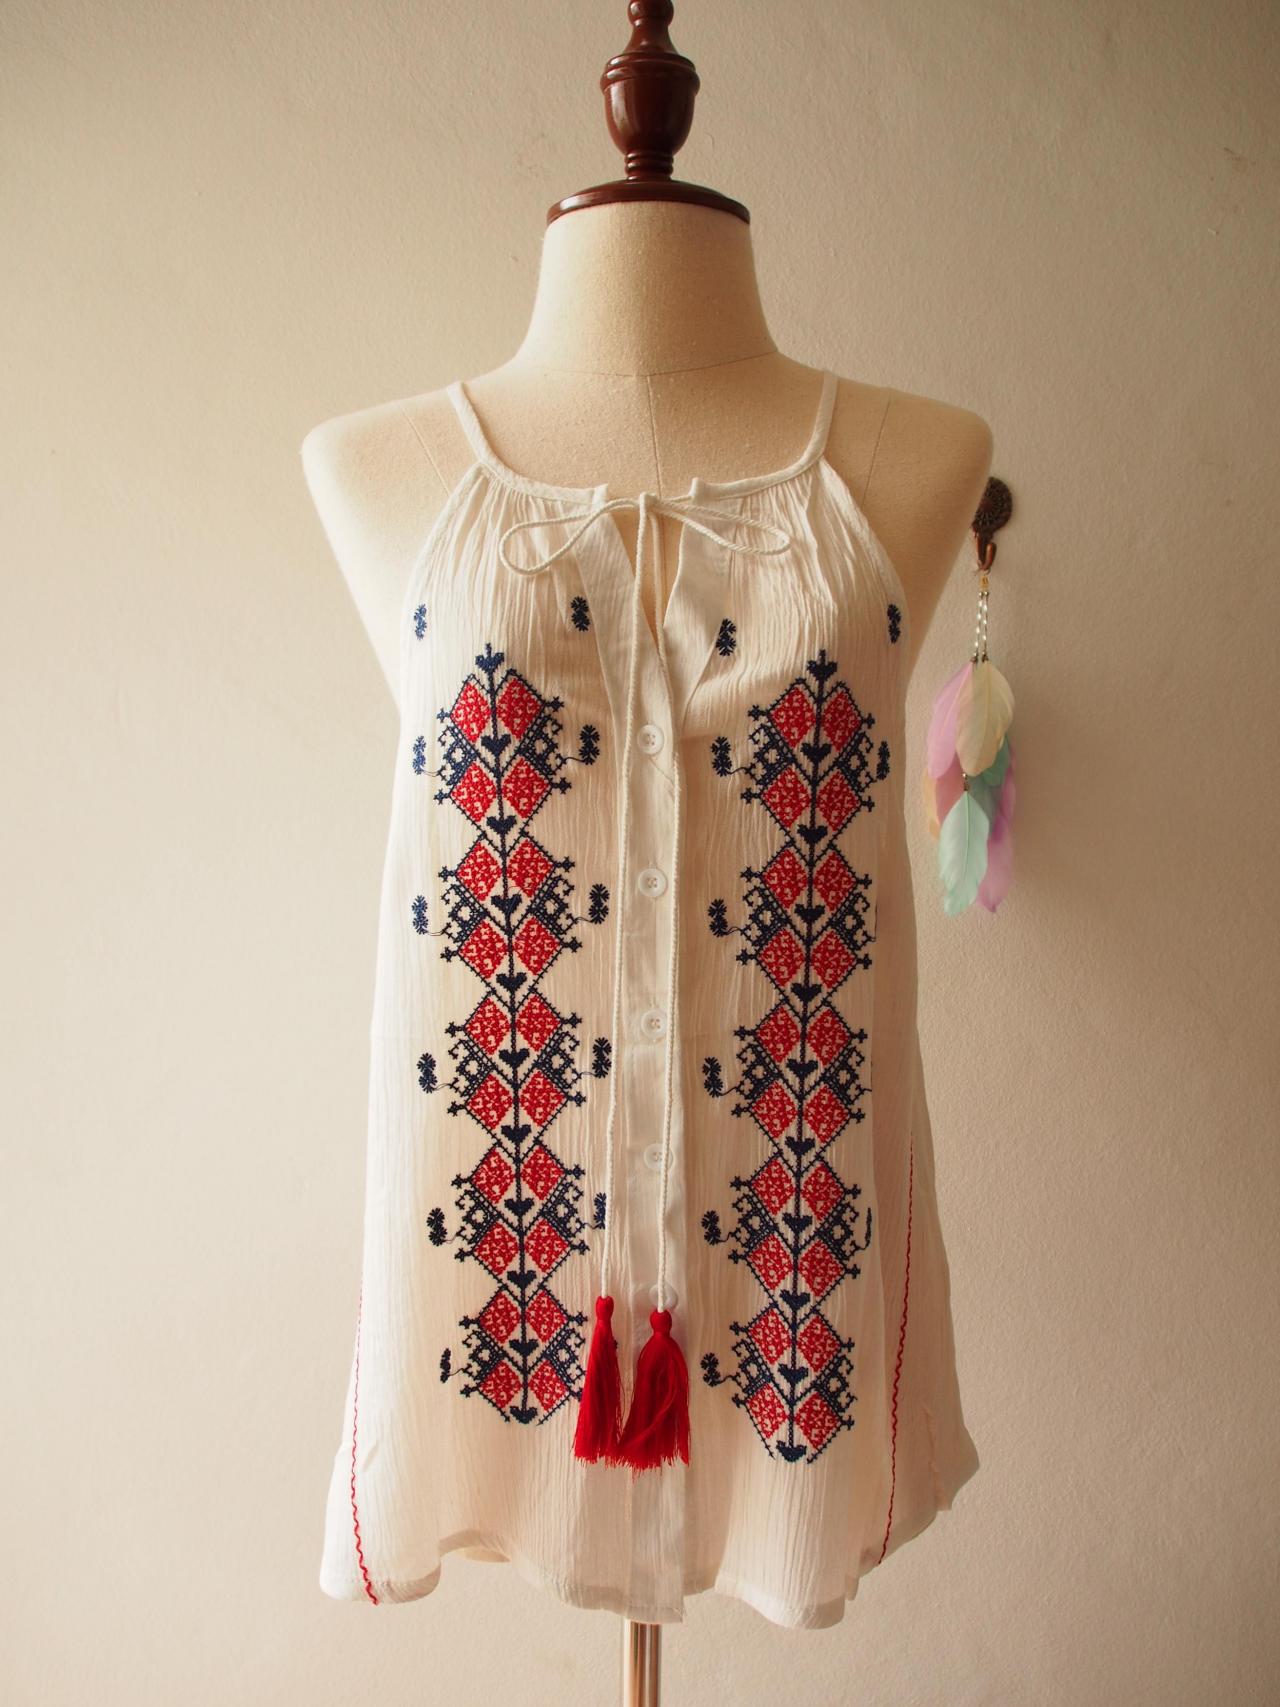 White Embroidery Top Boho Top Spaghetti Strap Tops Summer Bohemian Blouse ( Size Us8-us10)